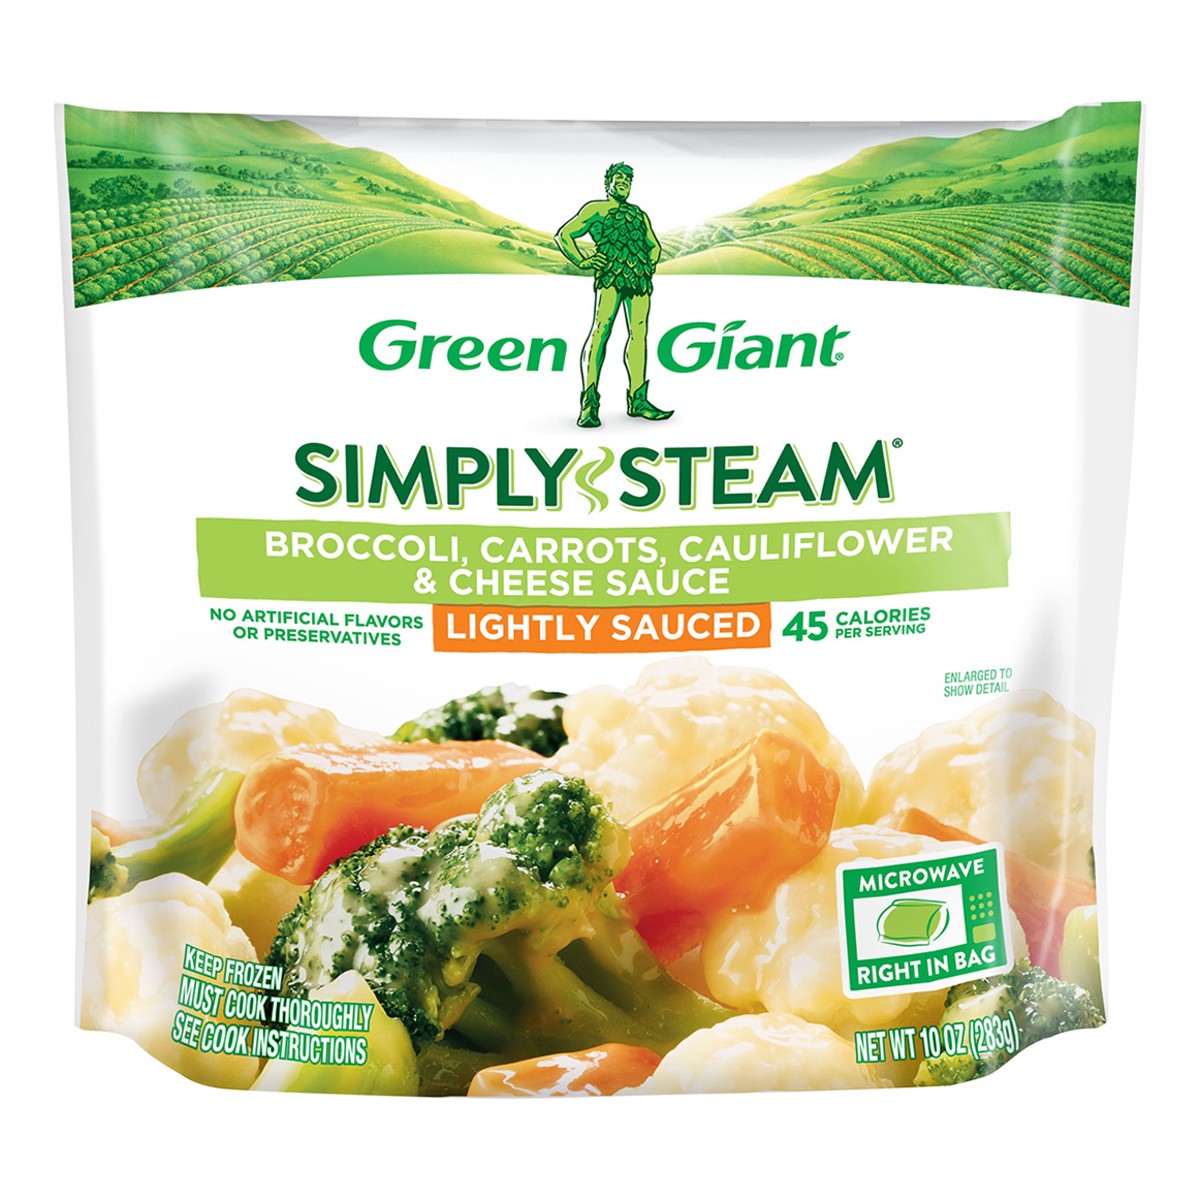 slide 1 of 4, Green Giant Simply Steam Lightly Sauced Broccoli, Carrots, Cauliflower & Cheese Sauce 10 oz, 12 oz